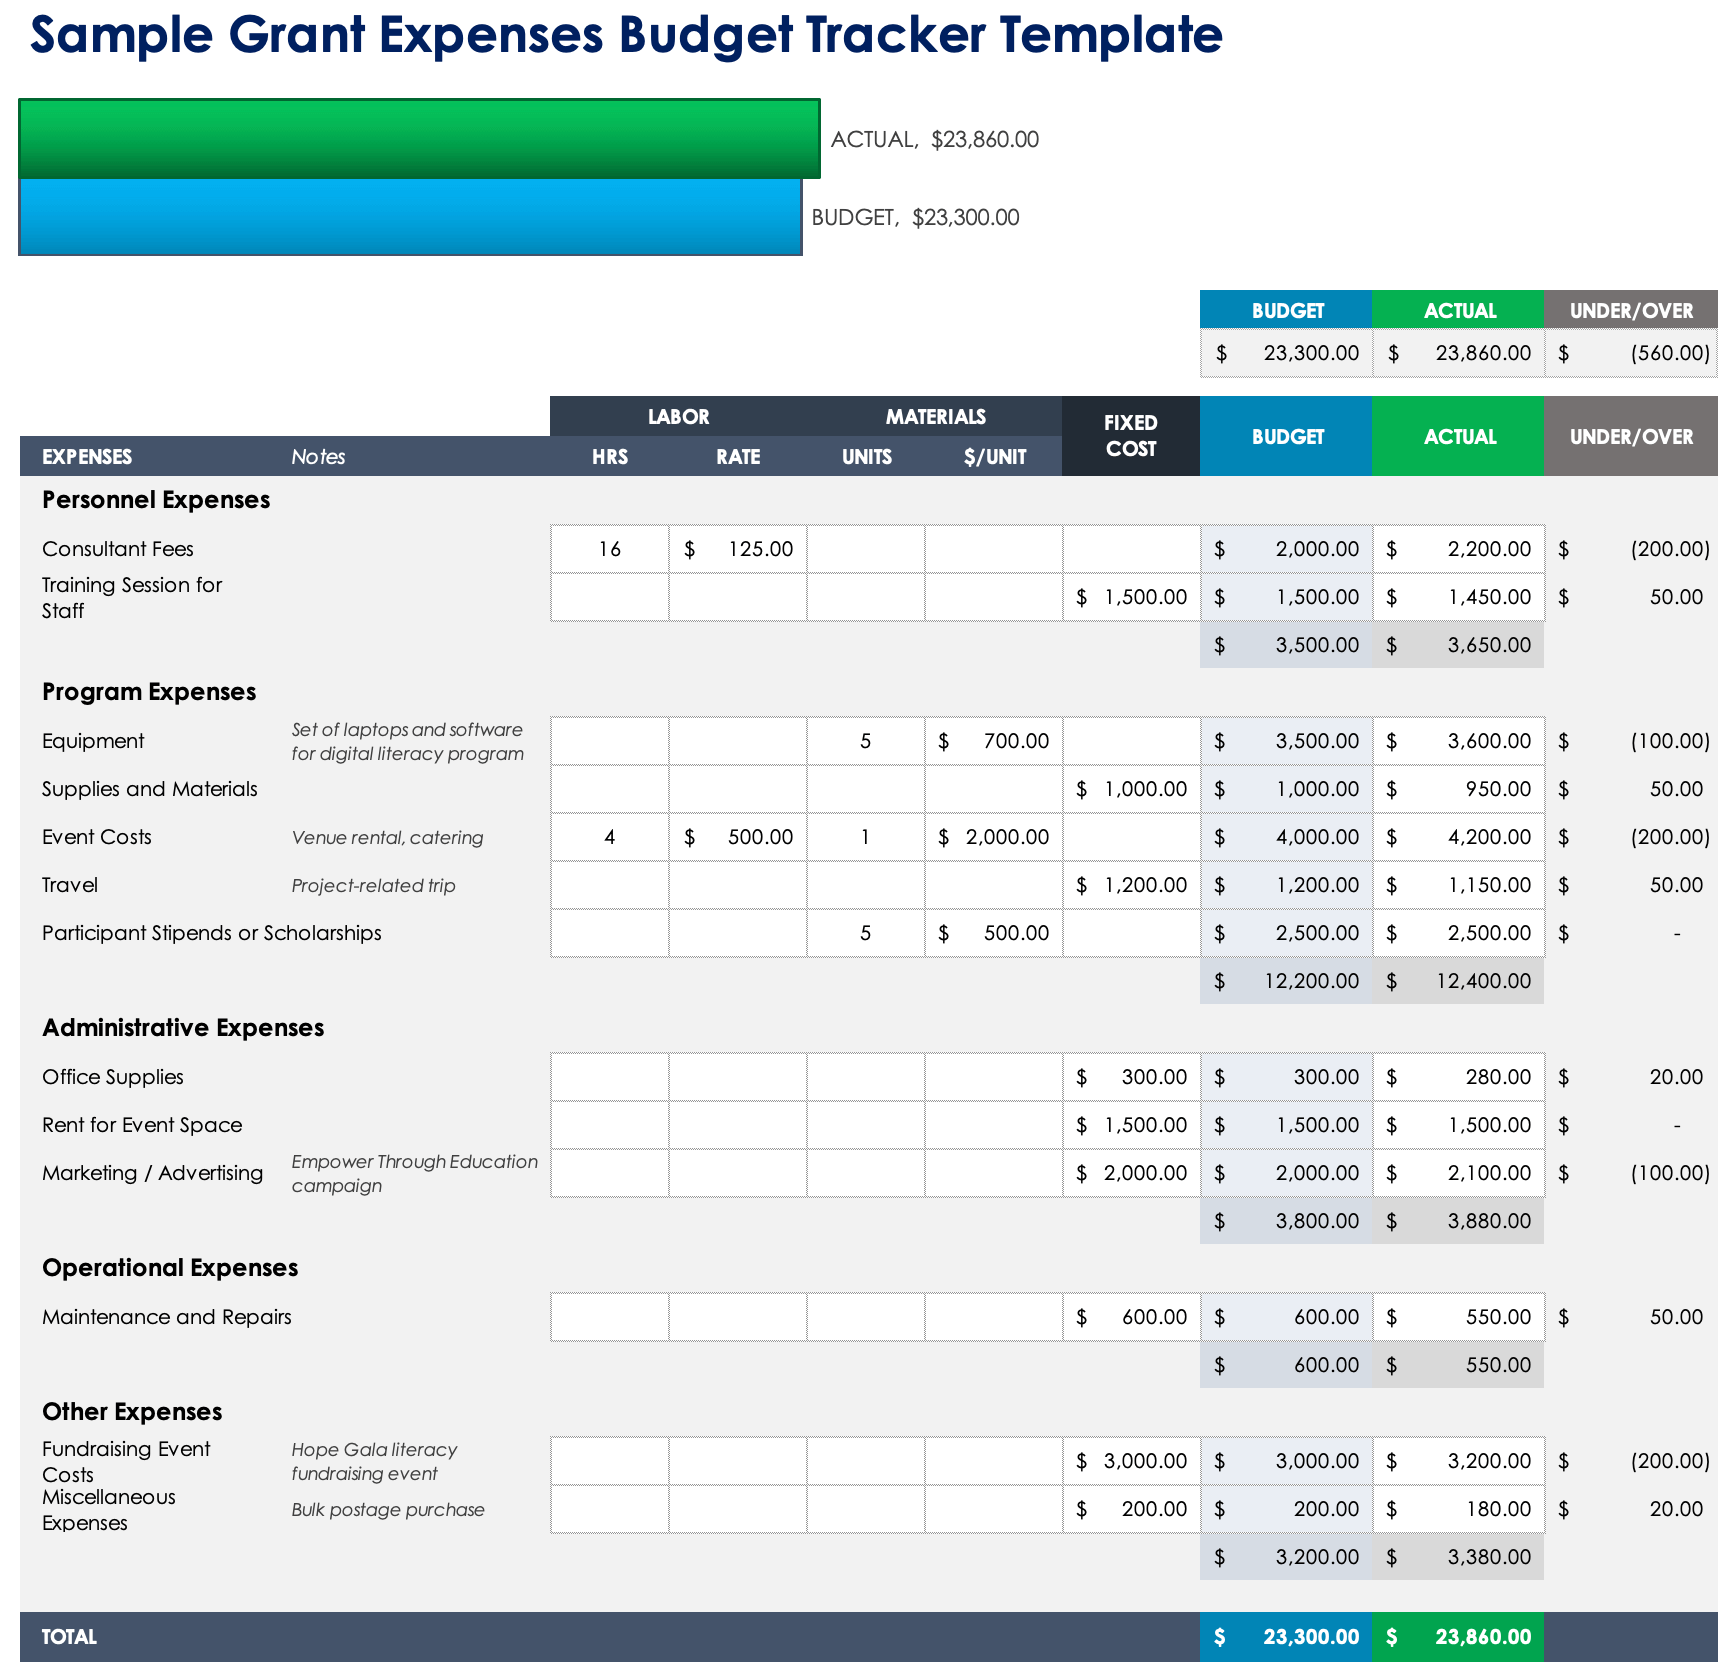 Sample Grant Expenses Budget Tracker Template